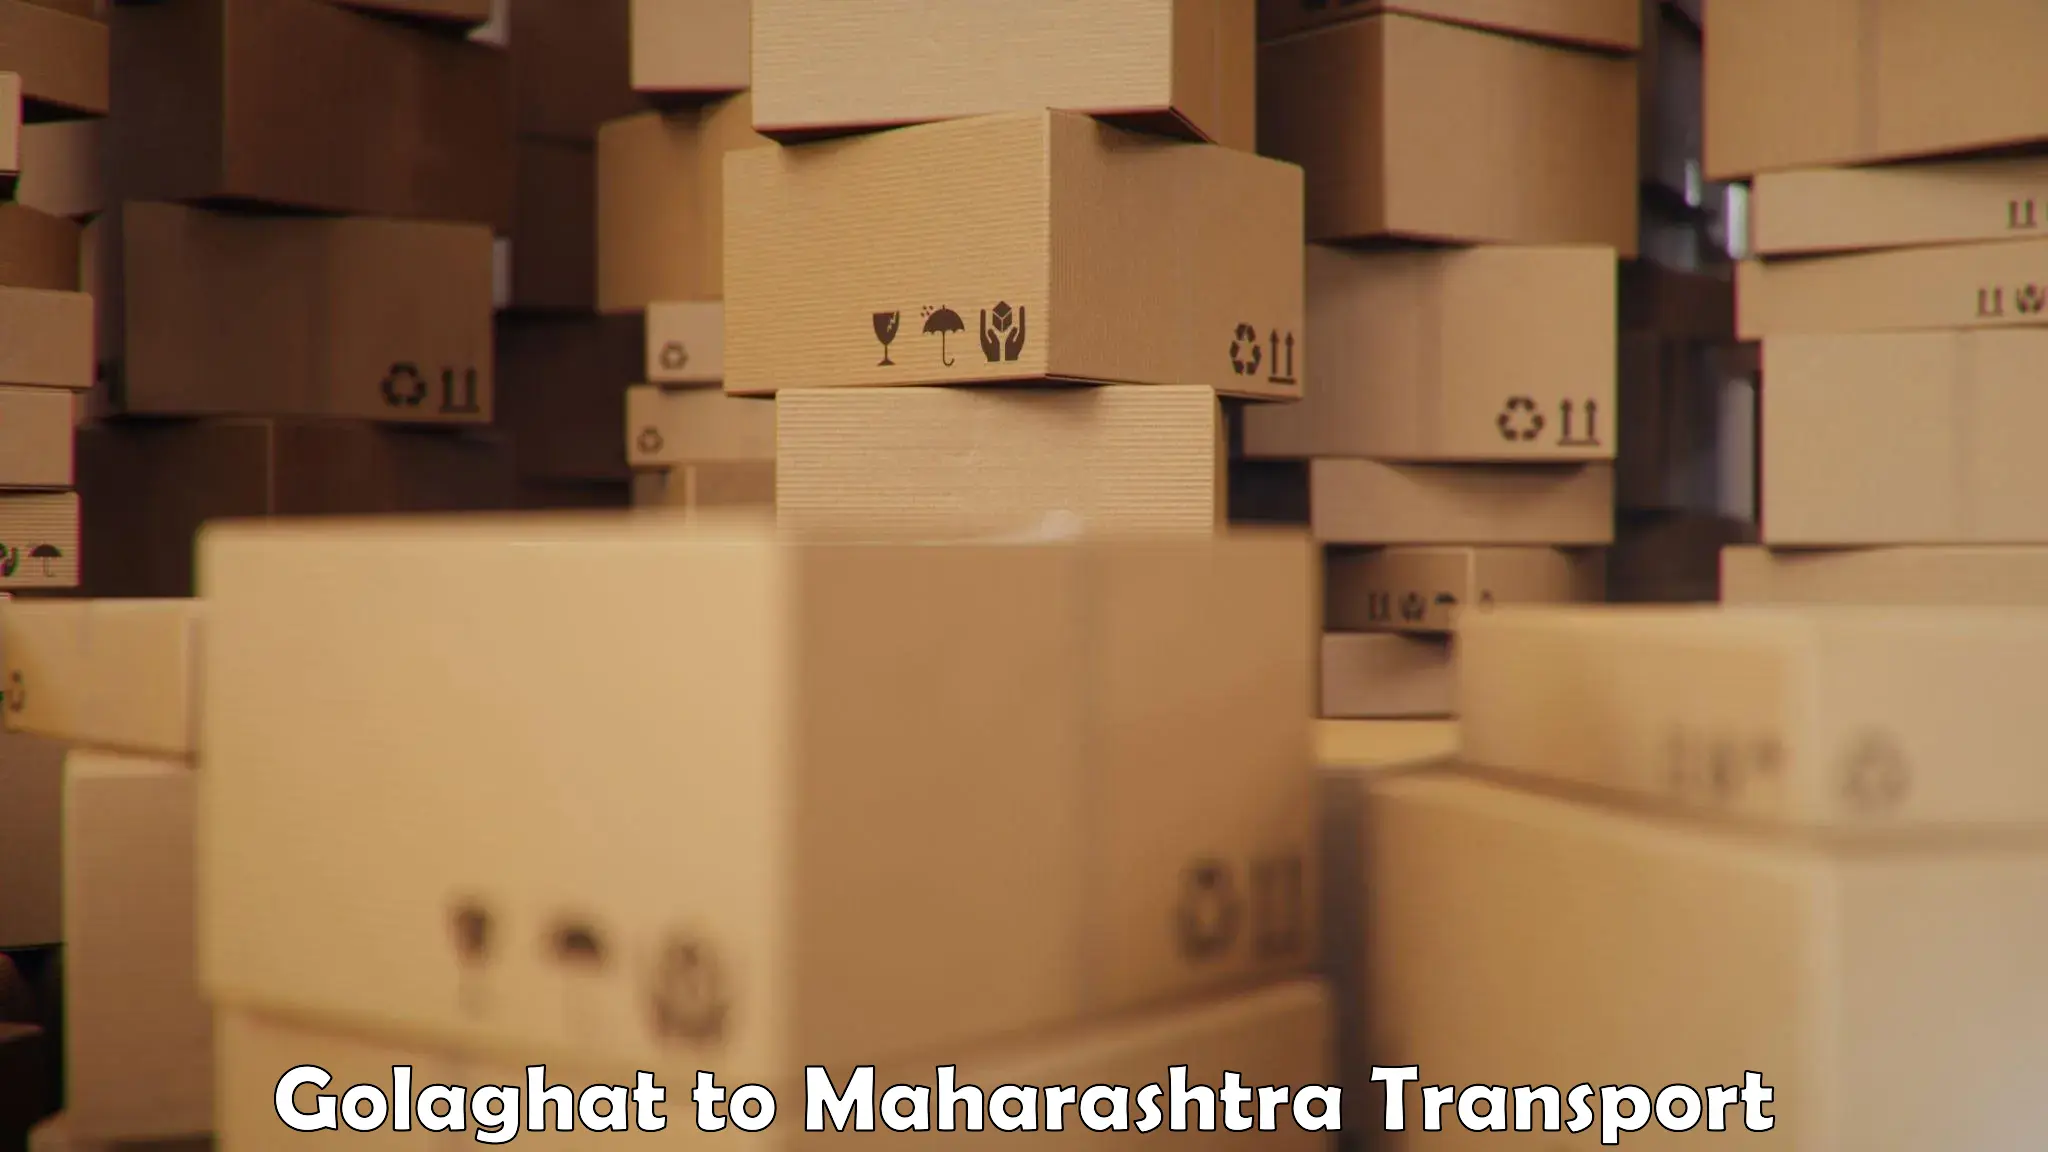 Truck transport companies in India Golaghat to Akkalkot